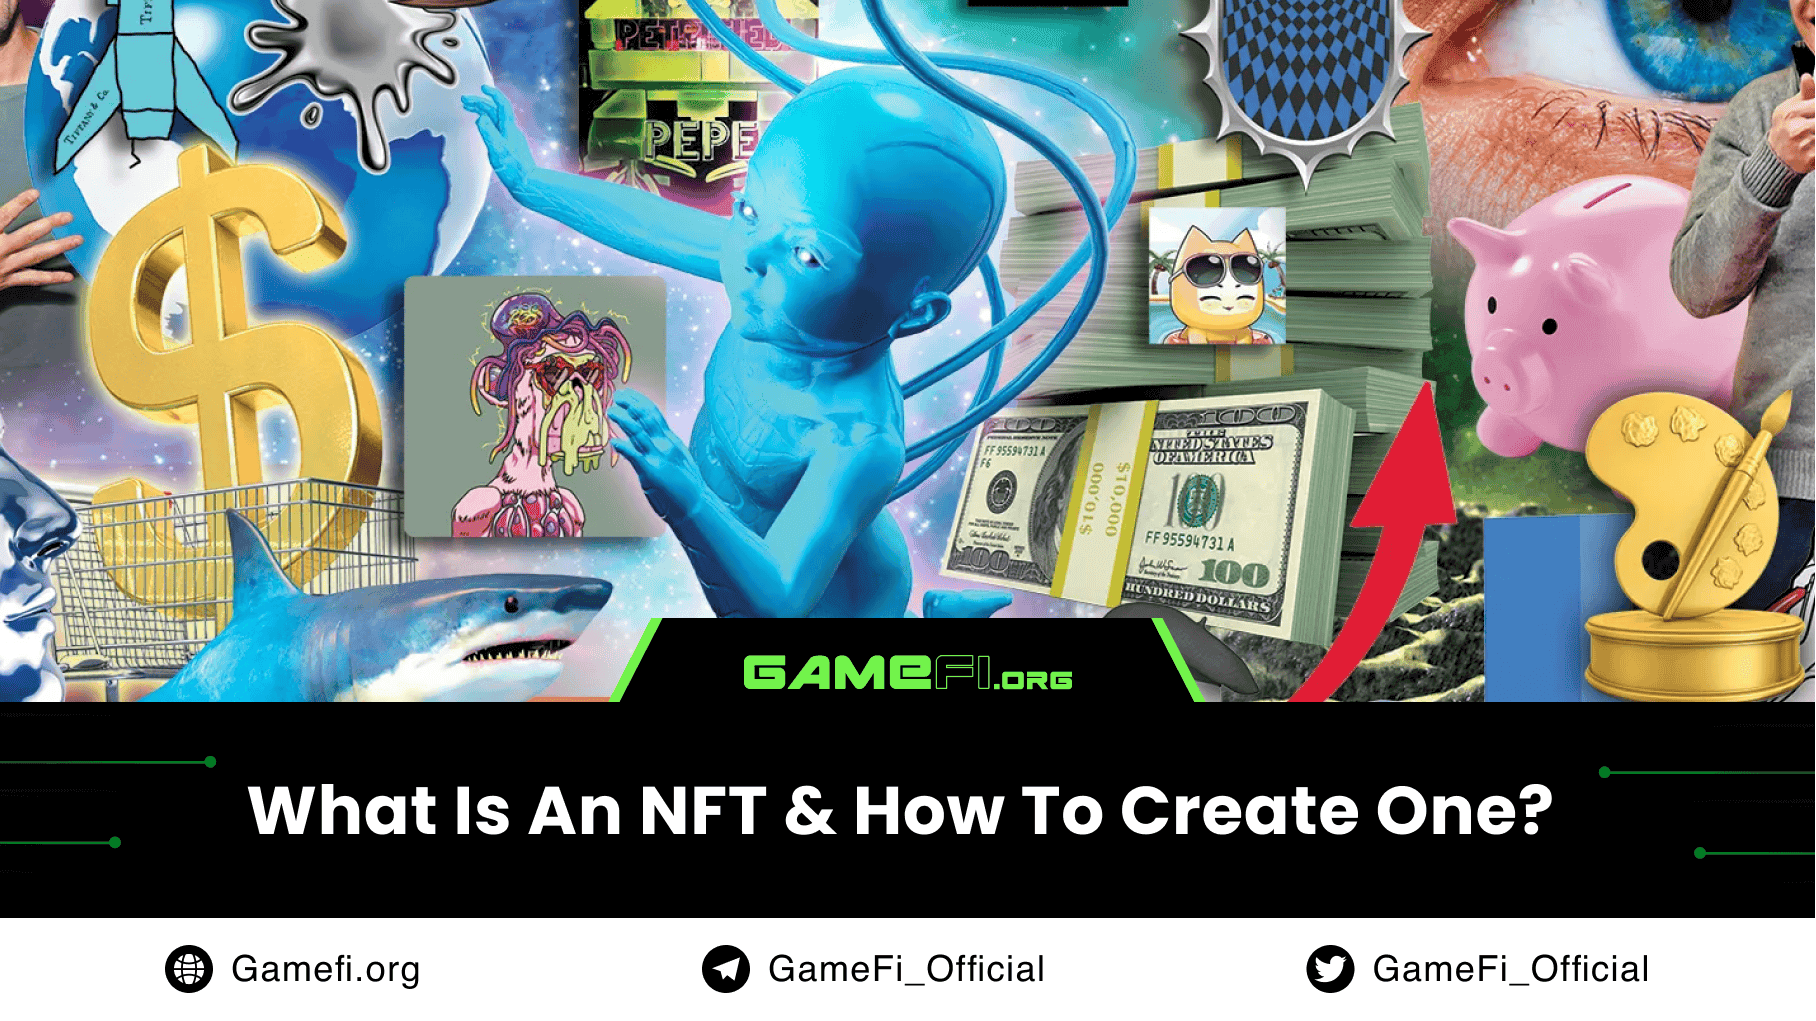 What Is an NFT & How to Create One?